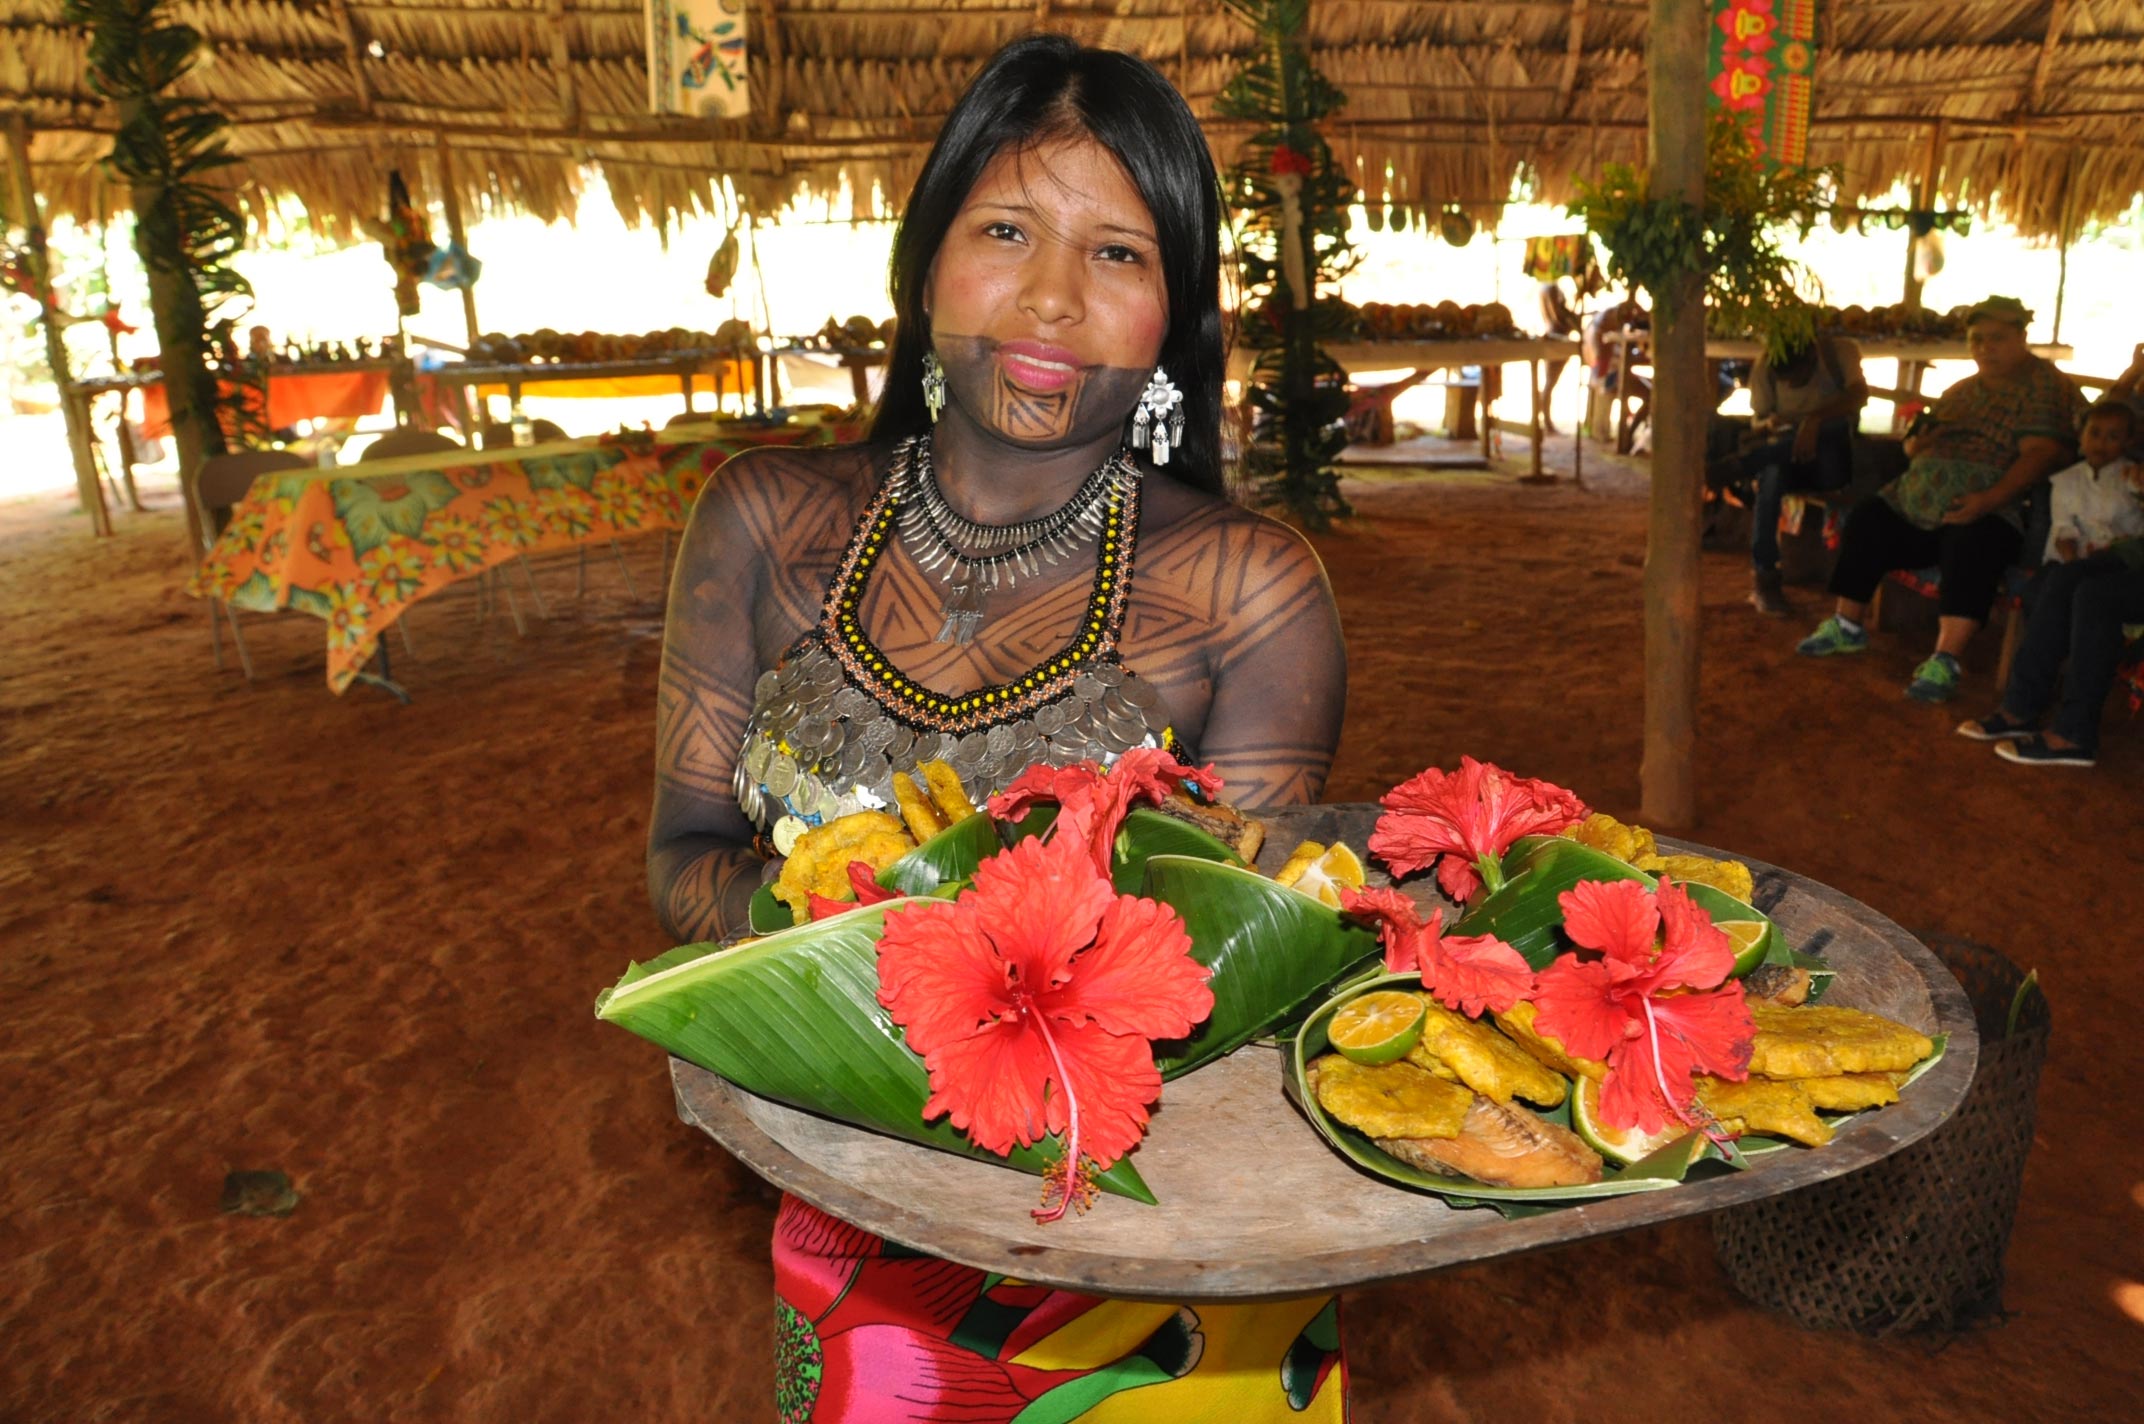 An Emberá woman in traditional garb displays a tray of food decorated with flowers